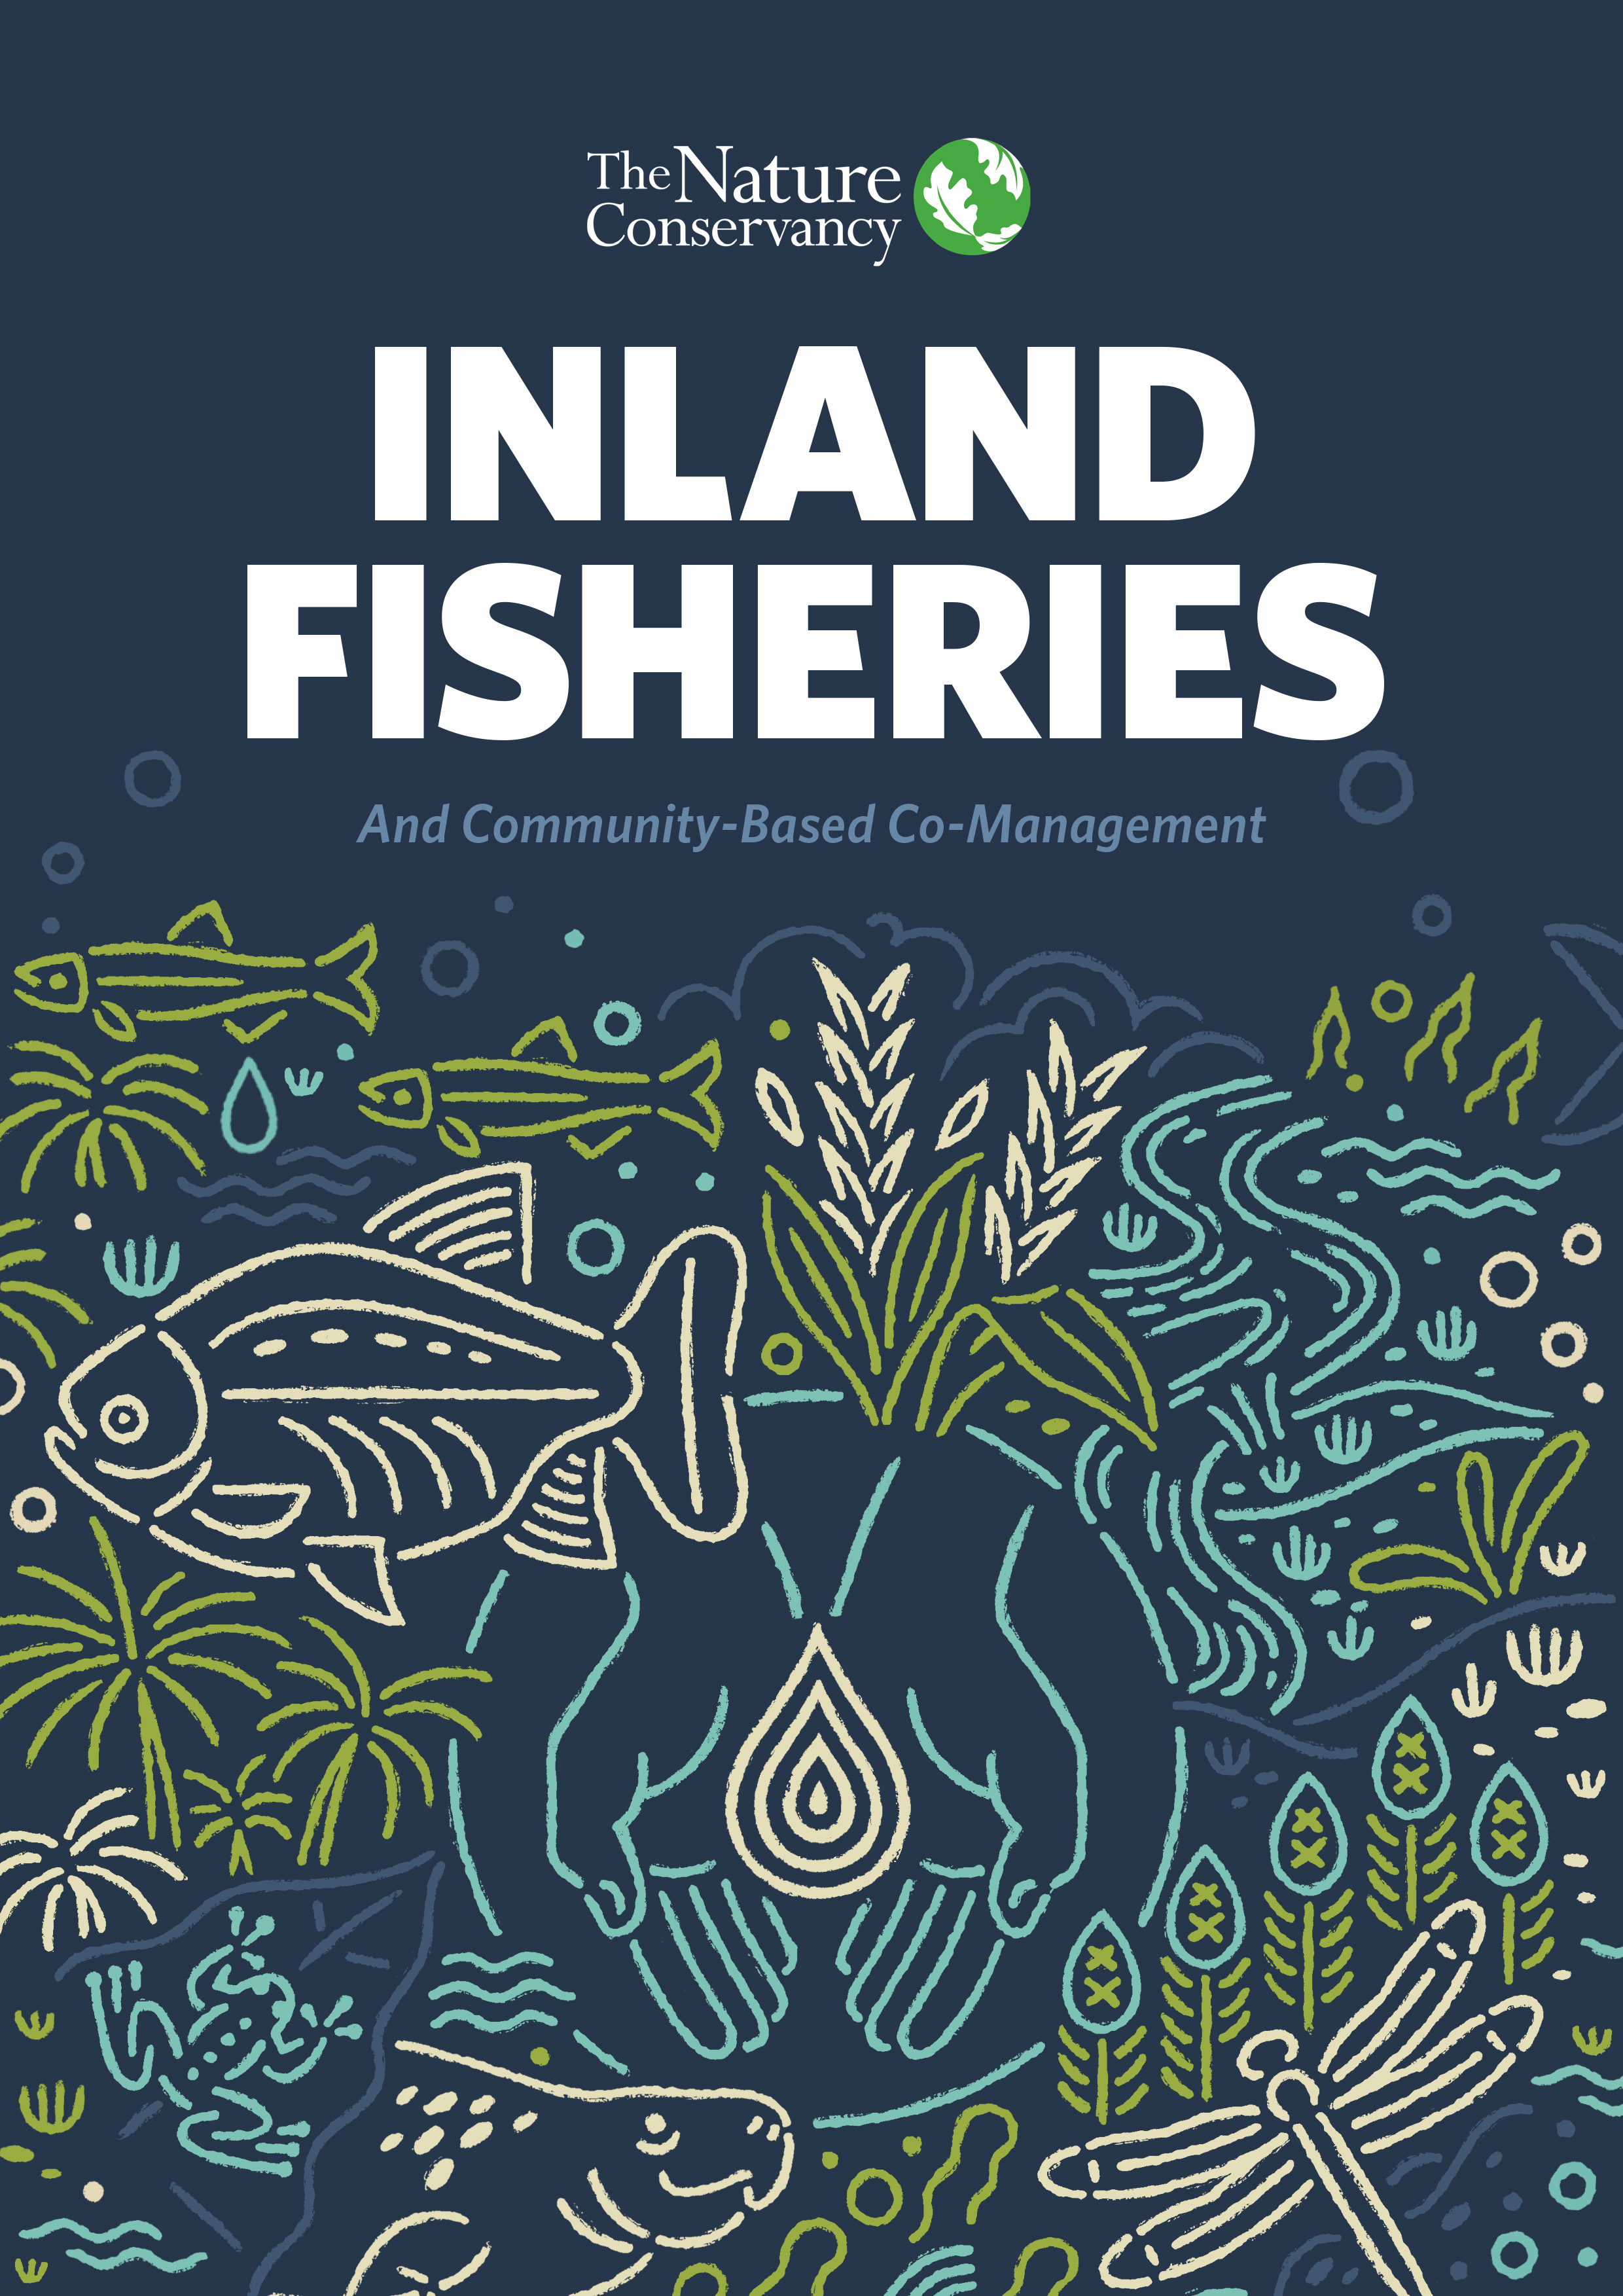 Cover of the Inland Fisheries Guide.